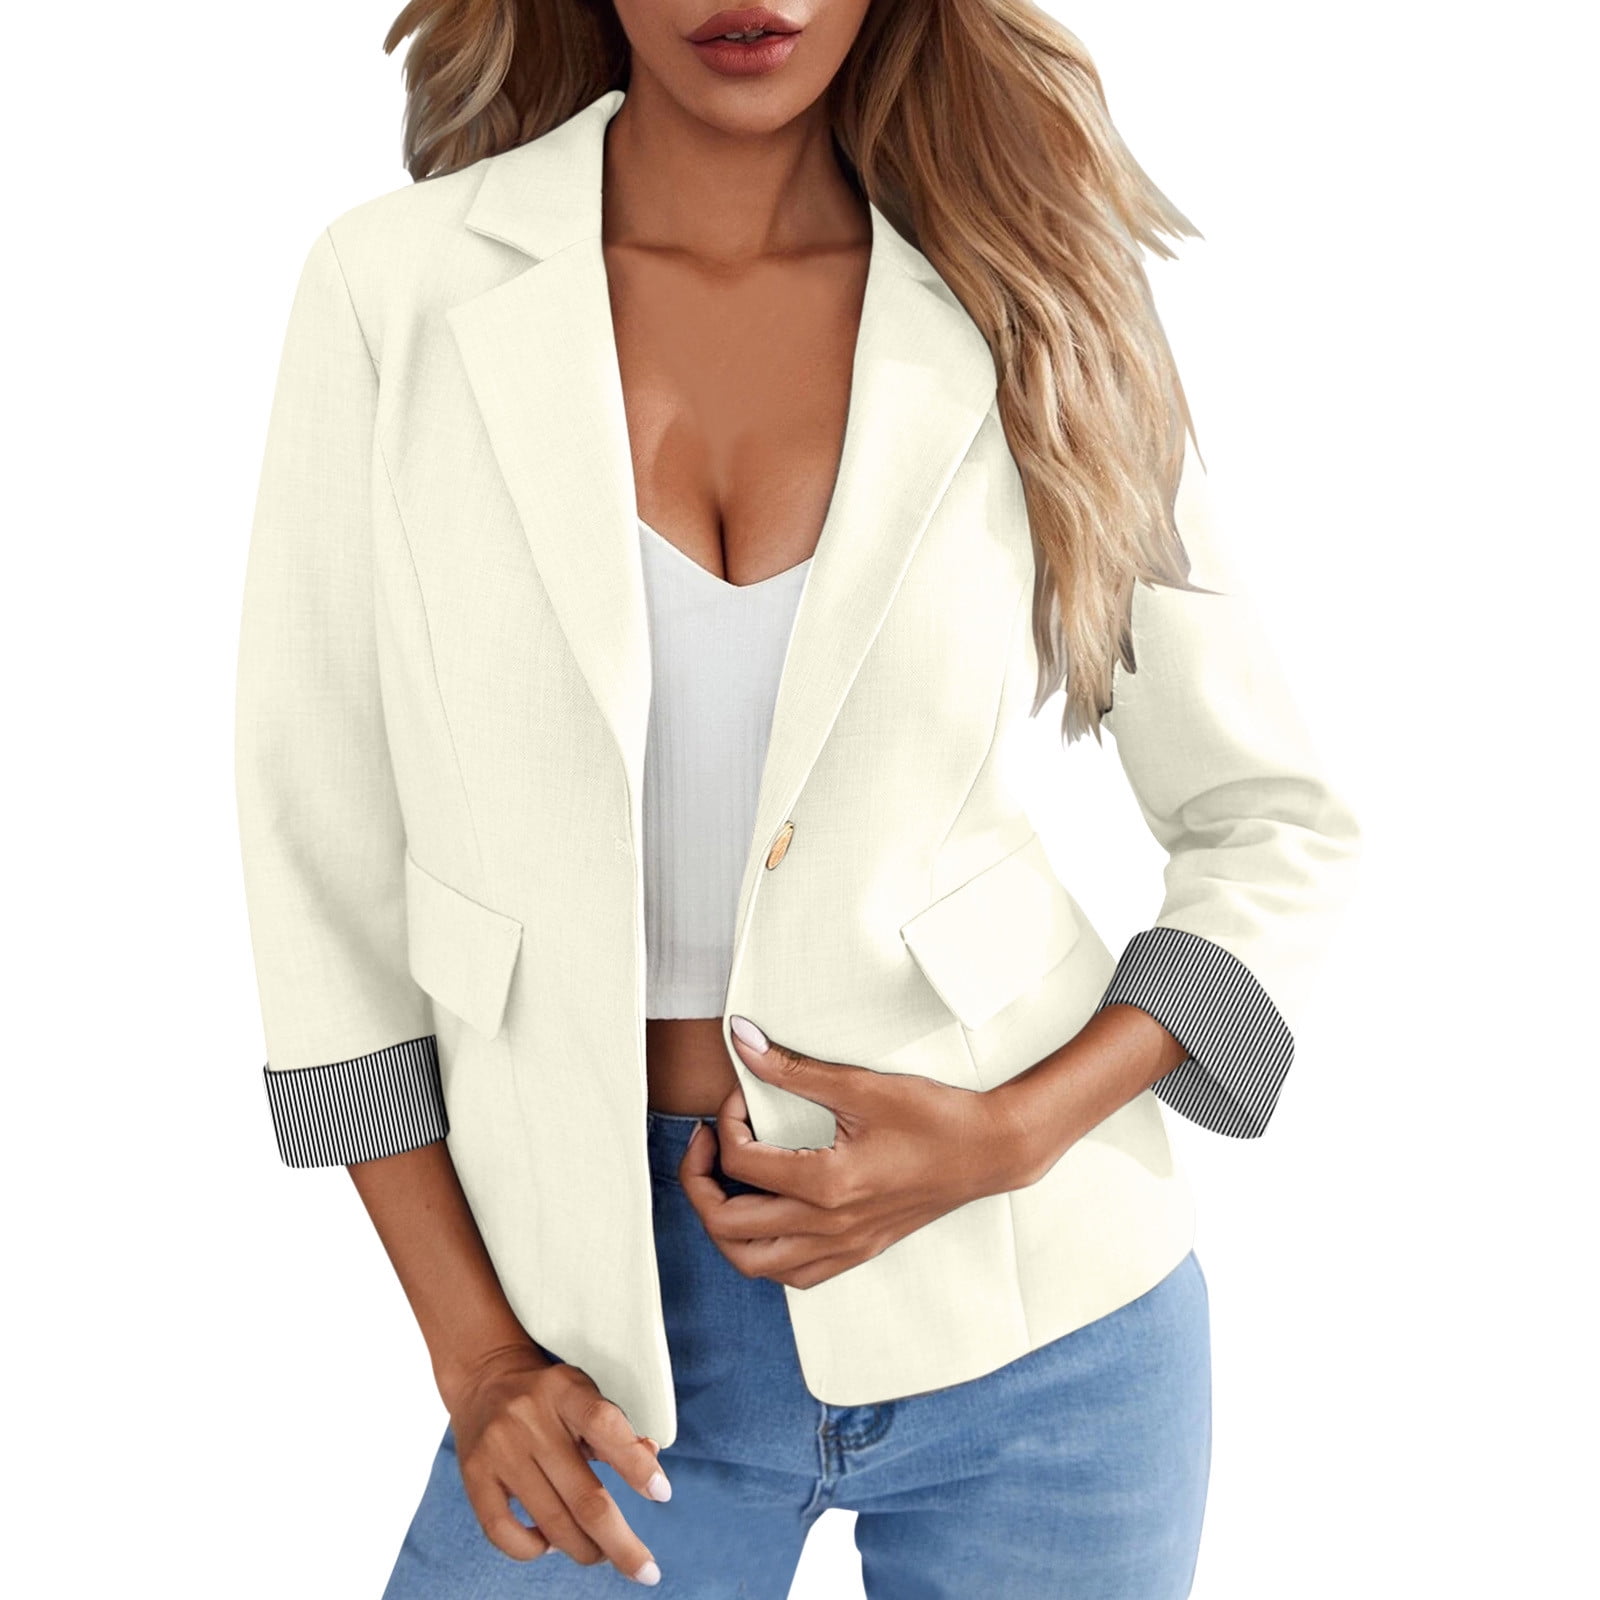  My Orders, Winter Clothes for Women Single Breasted Blazer  Women Split Collar Court Suit Jackets with Pockets Womens Jackets Prime  Clearance Items Womens Coats Winter Clearance Prime : Sports & Outdoors